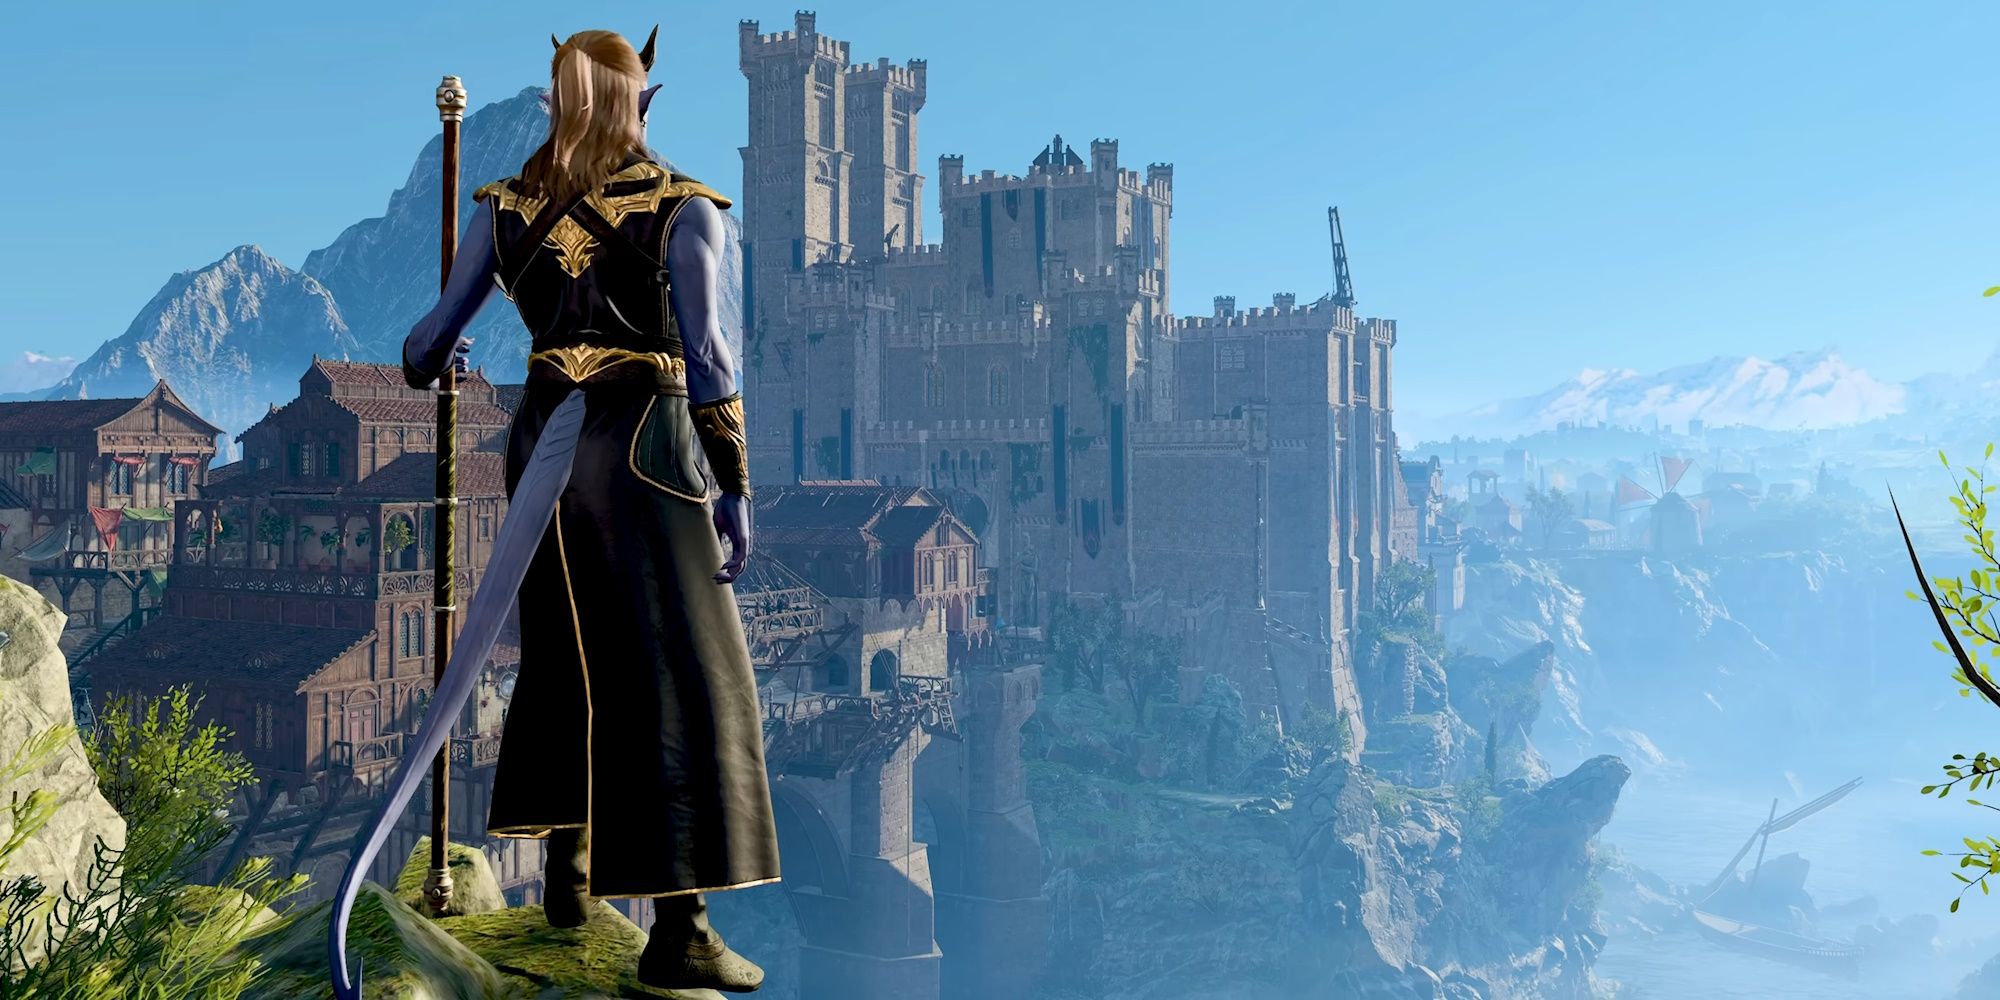 A tiefling player character stands on a high rock looking over the city in Baldur's Gate 3